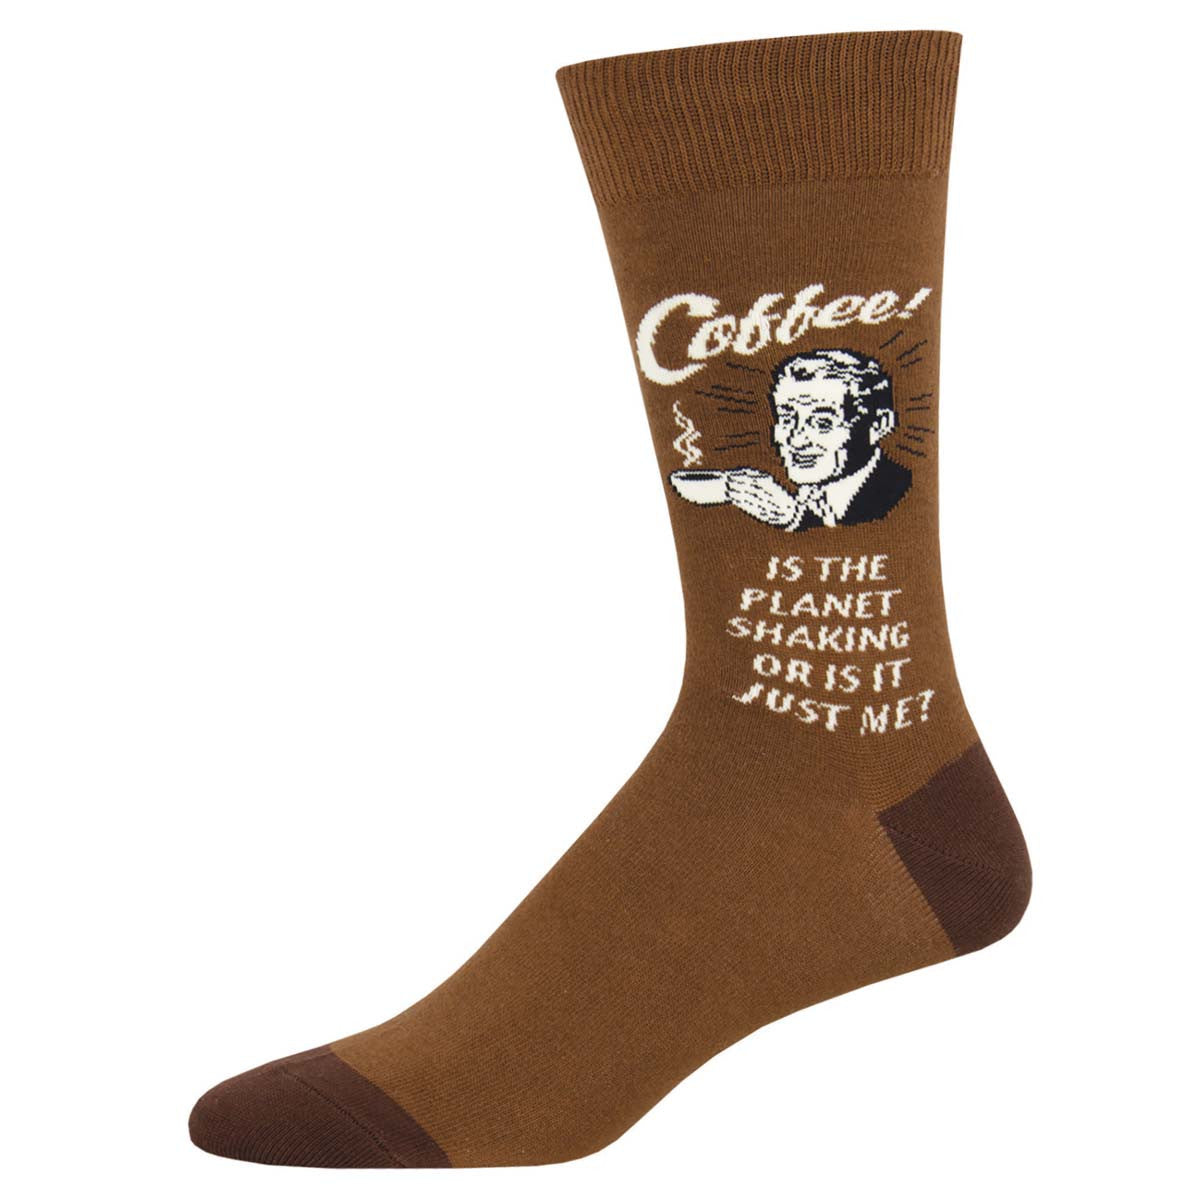 No Beans About It Socks - Tractor Beam Apparel